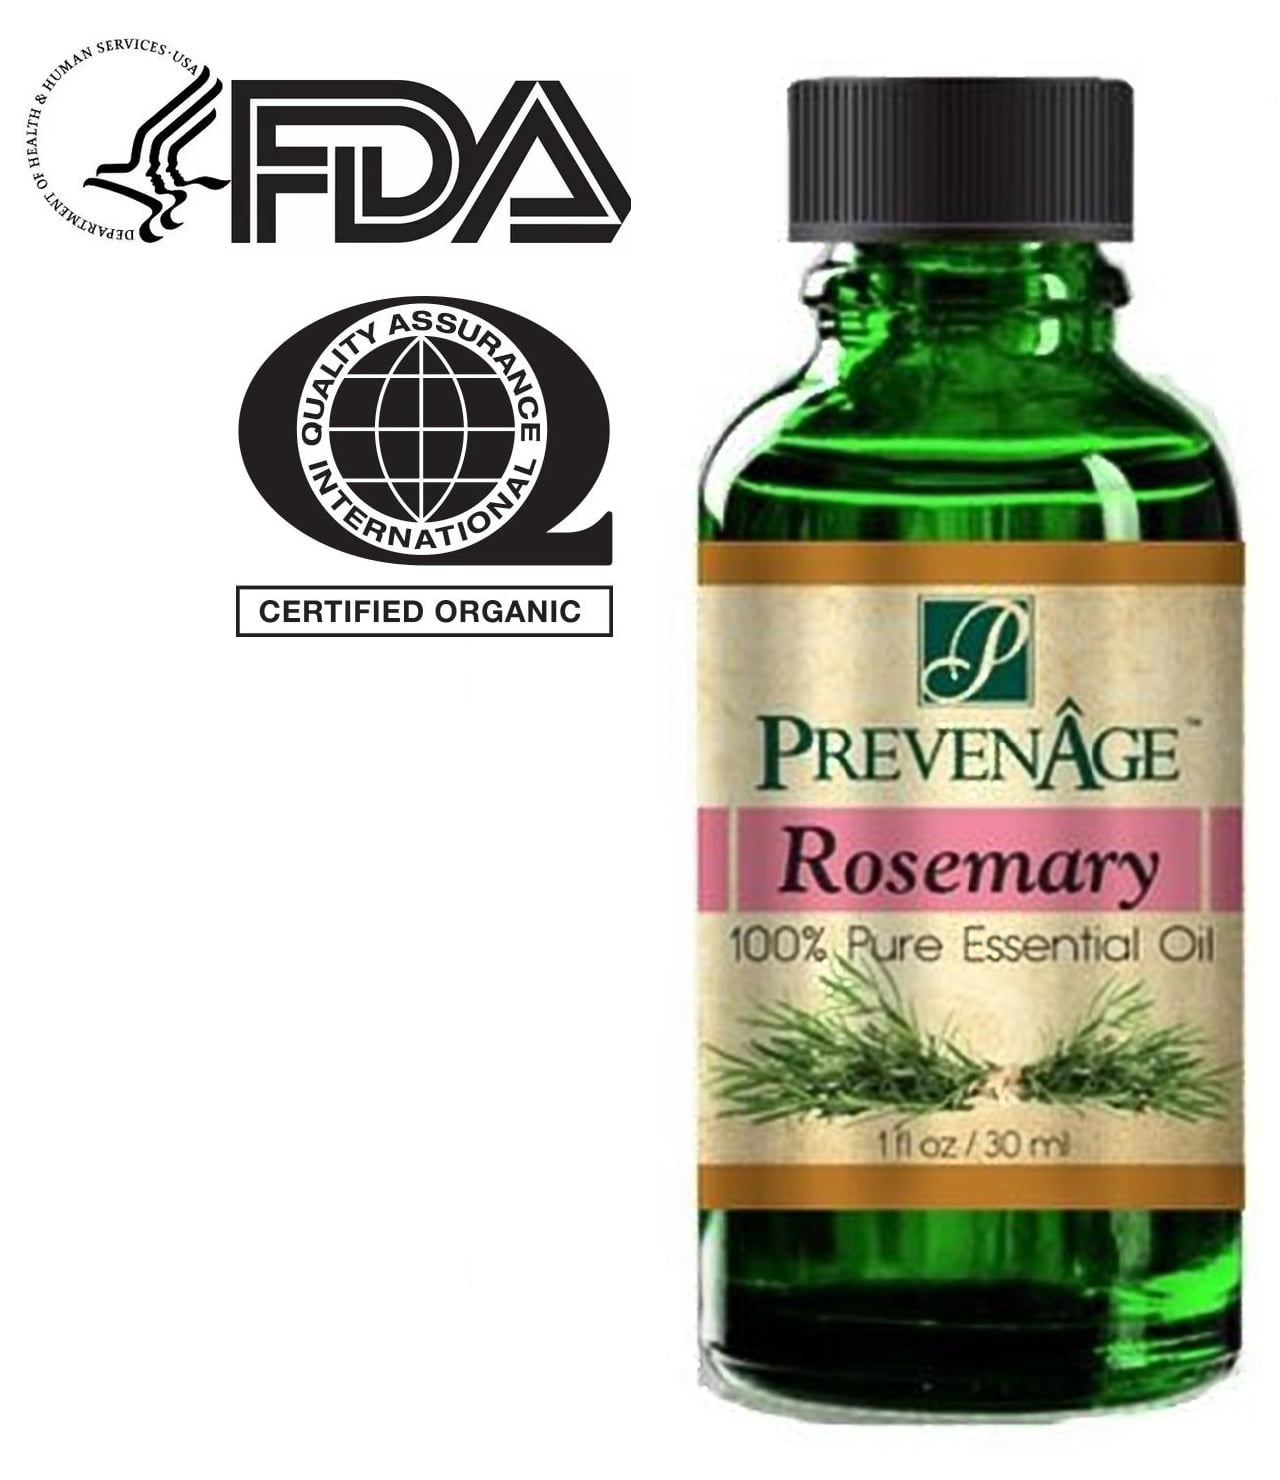 Rosemary Essential Oil - Aromatherapy Oil - 100% Pure - Therapeutic Grade - 30 mL by Prevenage